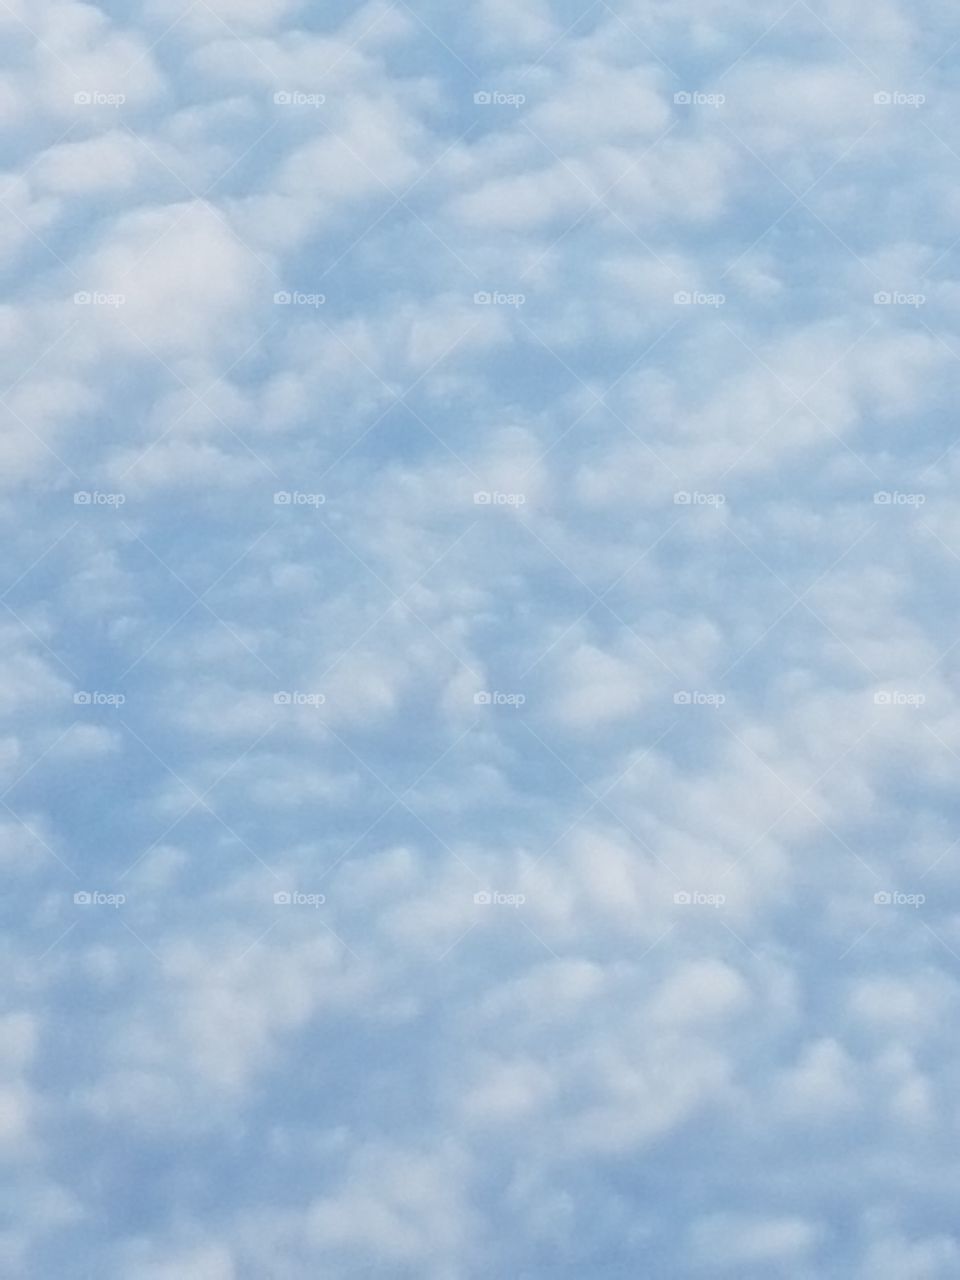 Fluffy cloud formation from the air.